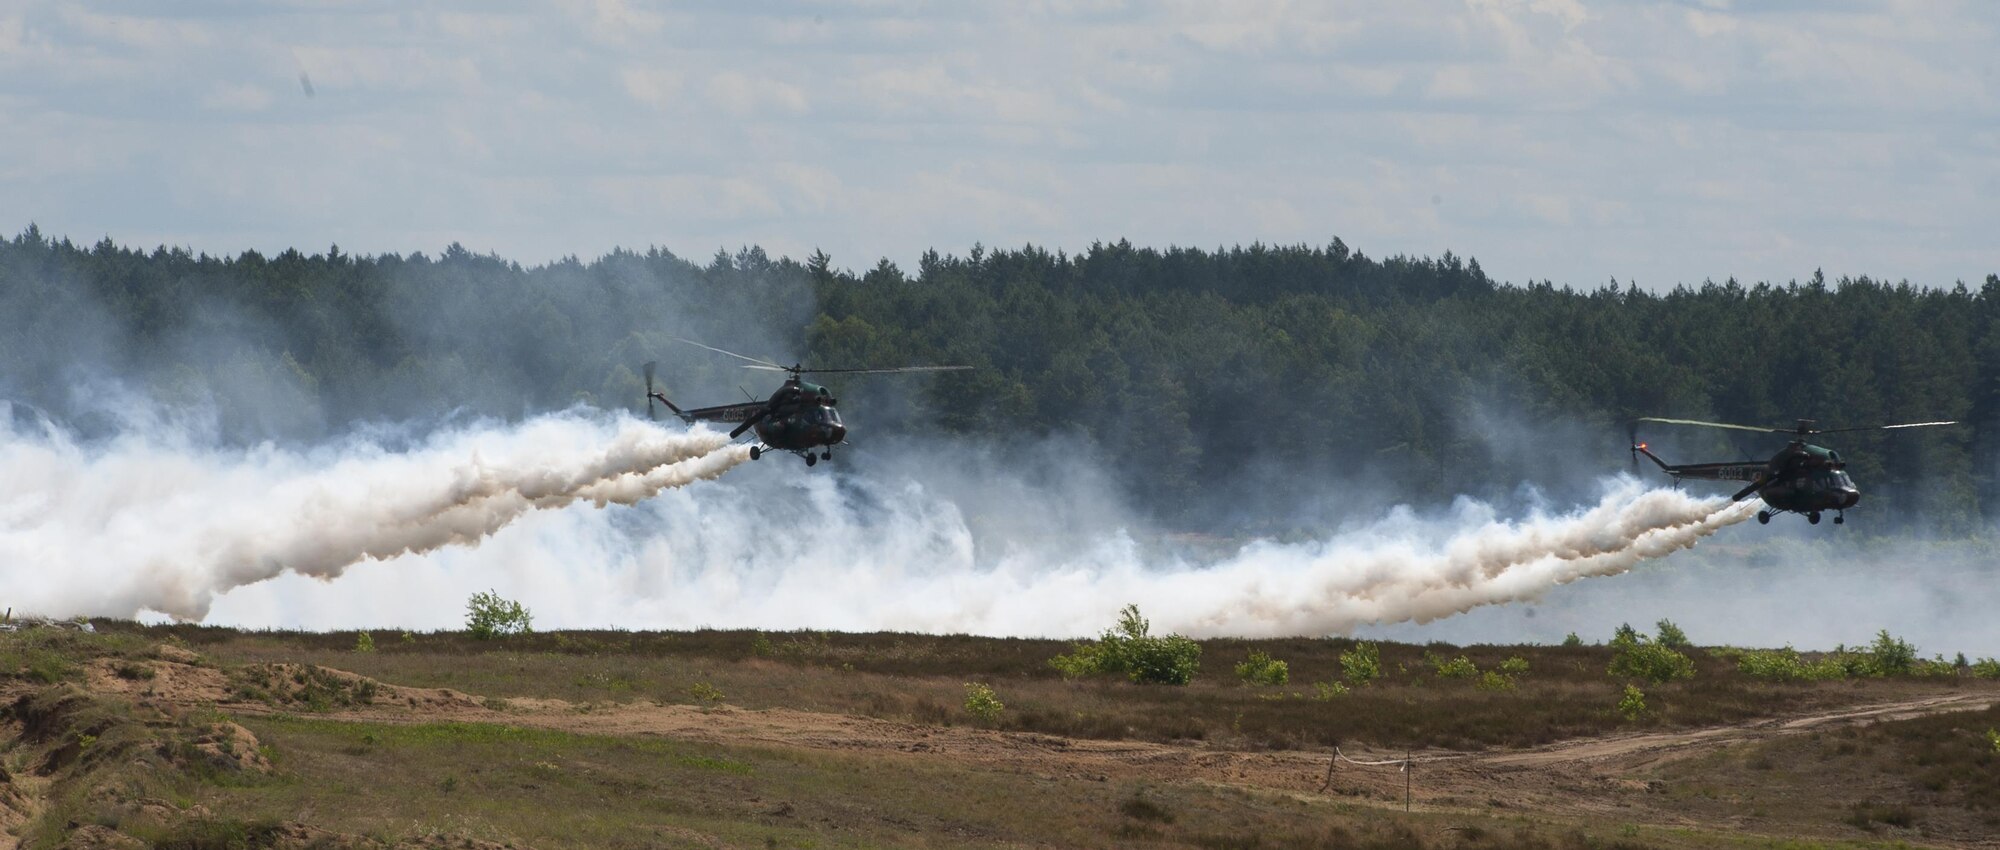 Two helicopters fly over a live-fire range during exercise Anakonda 2016 June 16, 2016, in Poland. The event was an opportunity for U.S. Airmen to train alongside allies and test aircraft, vehicles and other equipment in a live-fire exercise. The event served as a wrap up for Anakonda 2016, a Polish-led international exercise that aimed to train, exercise and integrate Poland and its allied forces by demonstrating their defense capabilities to deploy in mass numbers and sustain combat power. (U.S. Air Force photo/Airman 1st Class Lane T. Plummer)